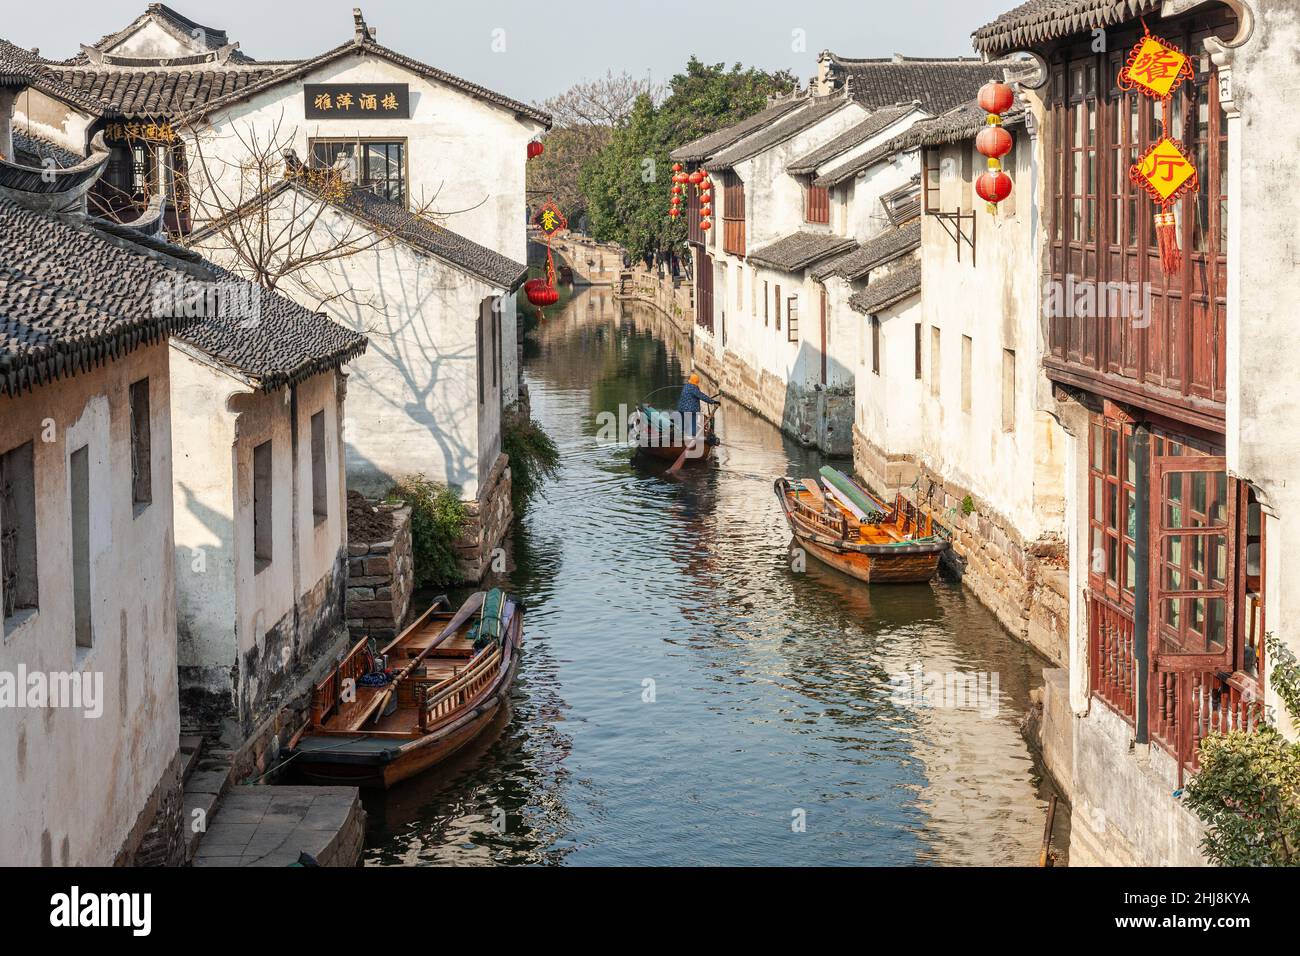 View of a canal with water taxis in the water town of Zhouzhuang, China Stock Photo